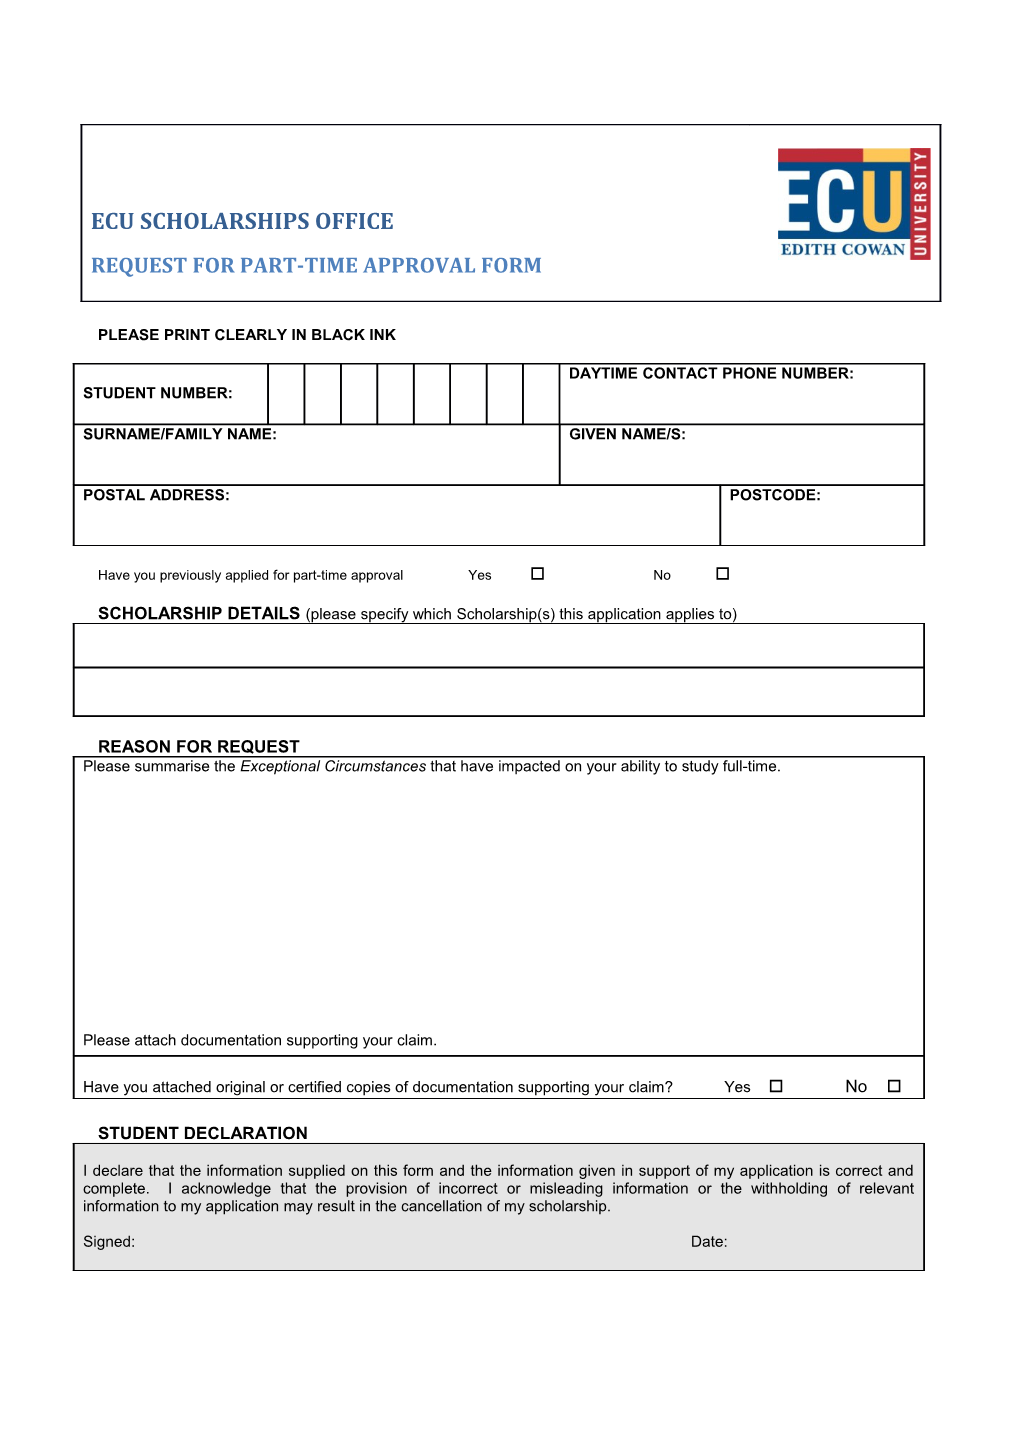 Request for Part-Time Approval Form